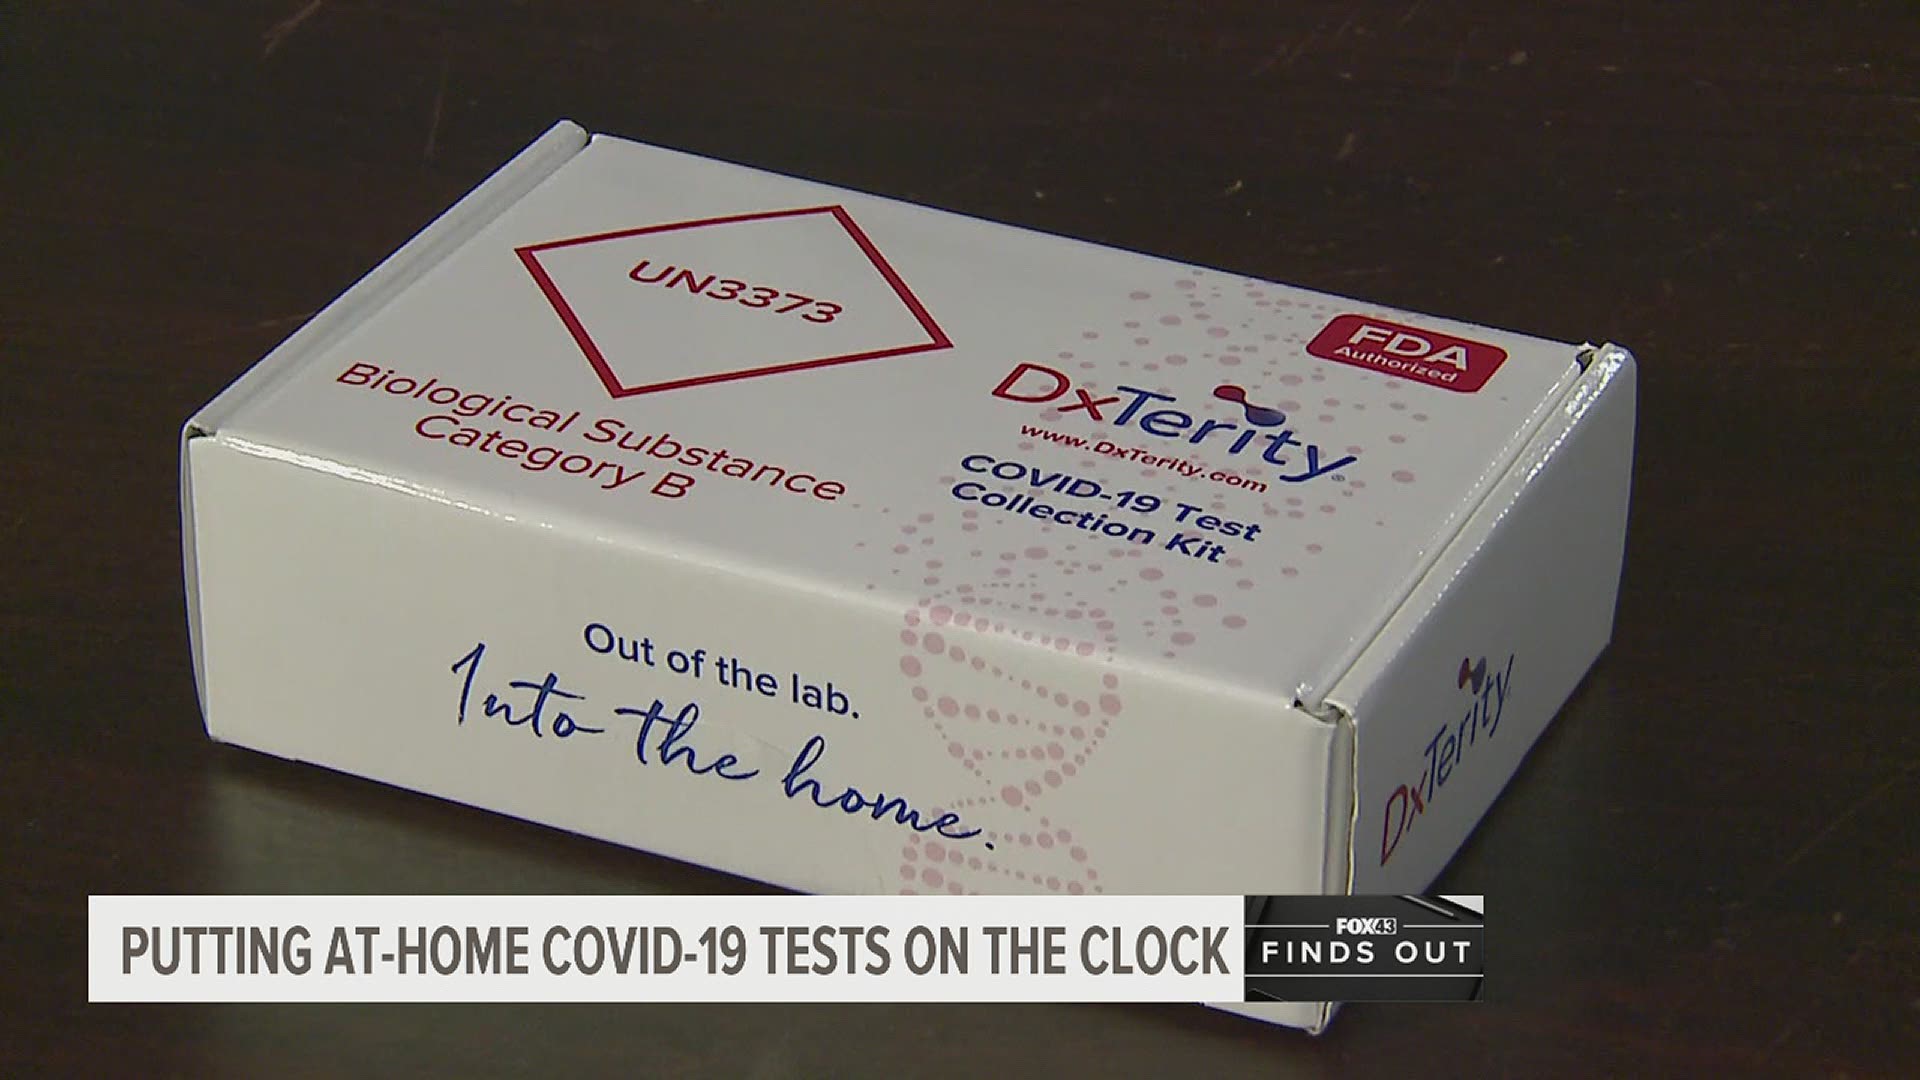 A negative COVID-19 test result within days of travel is often a key to go anywhere right now. FOX43 Finds Out puts some of the at-home COVID-19 tests on the clock.